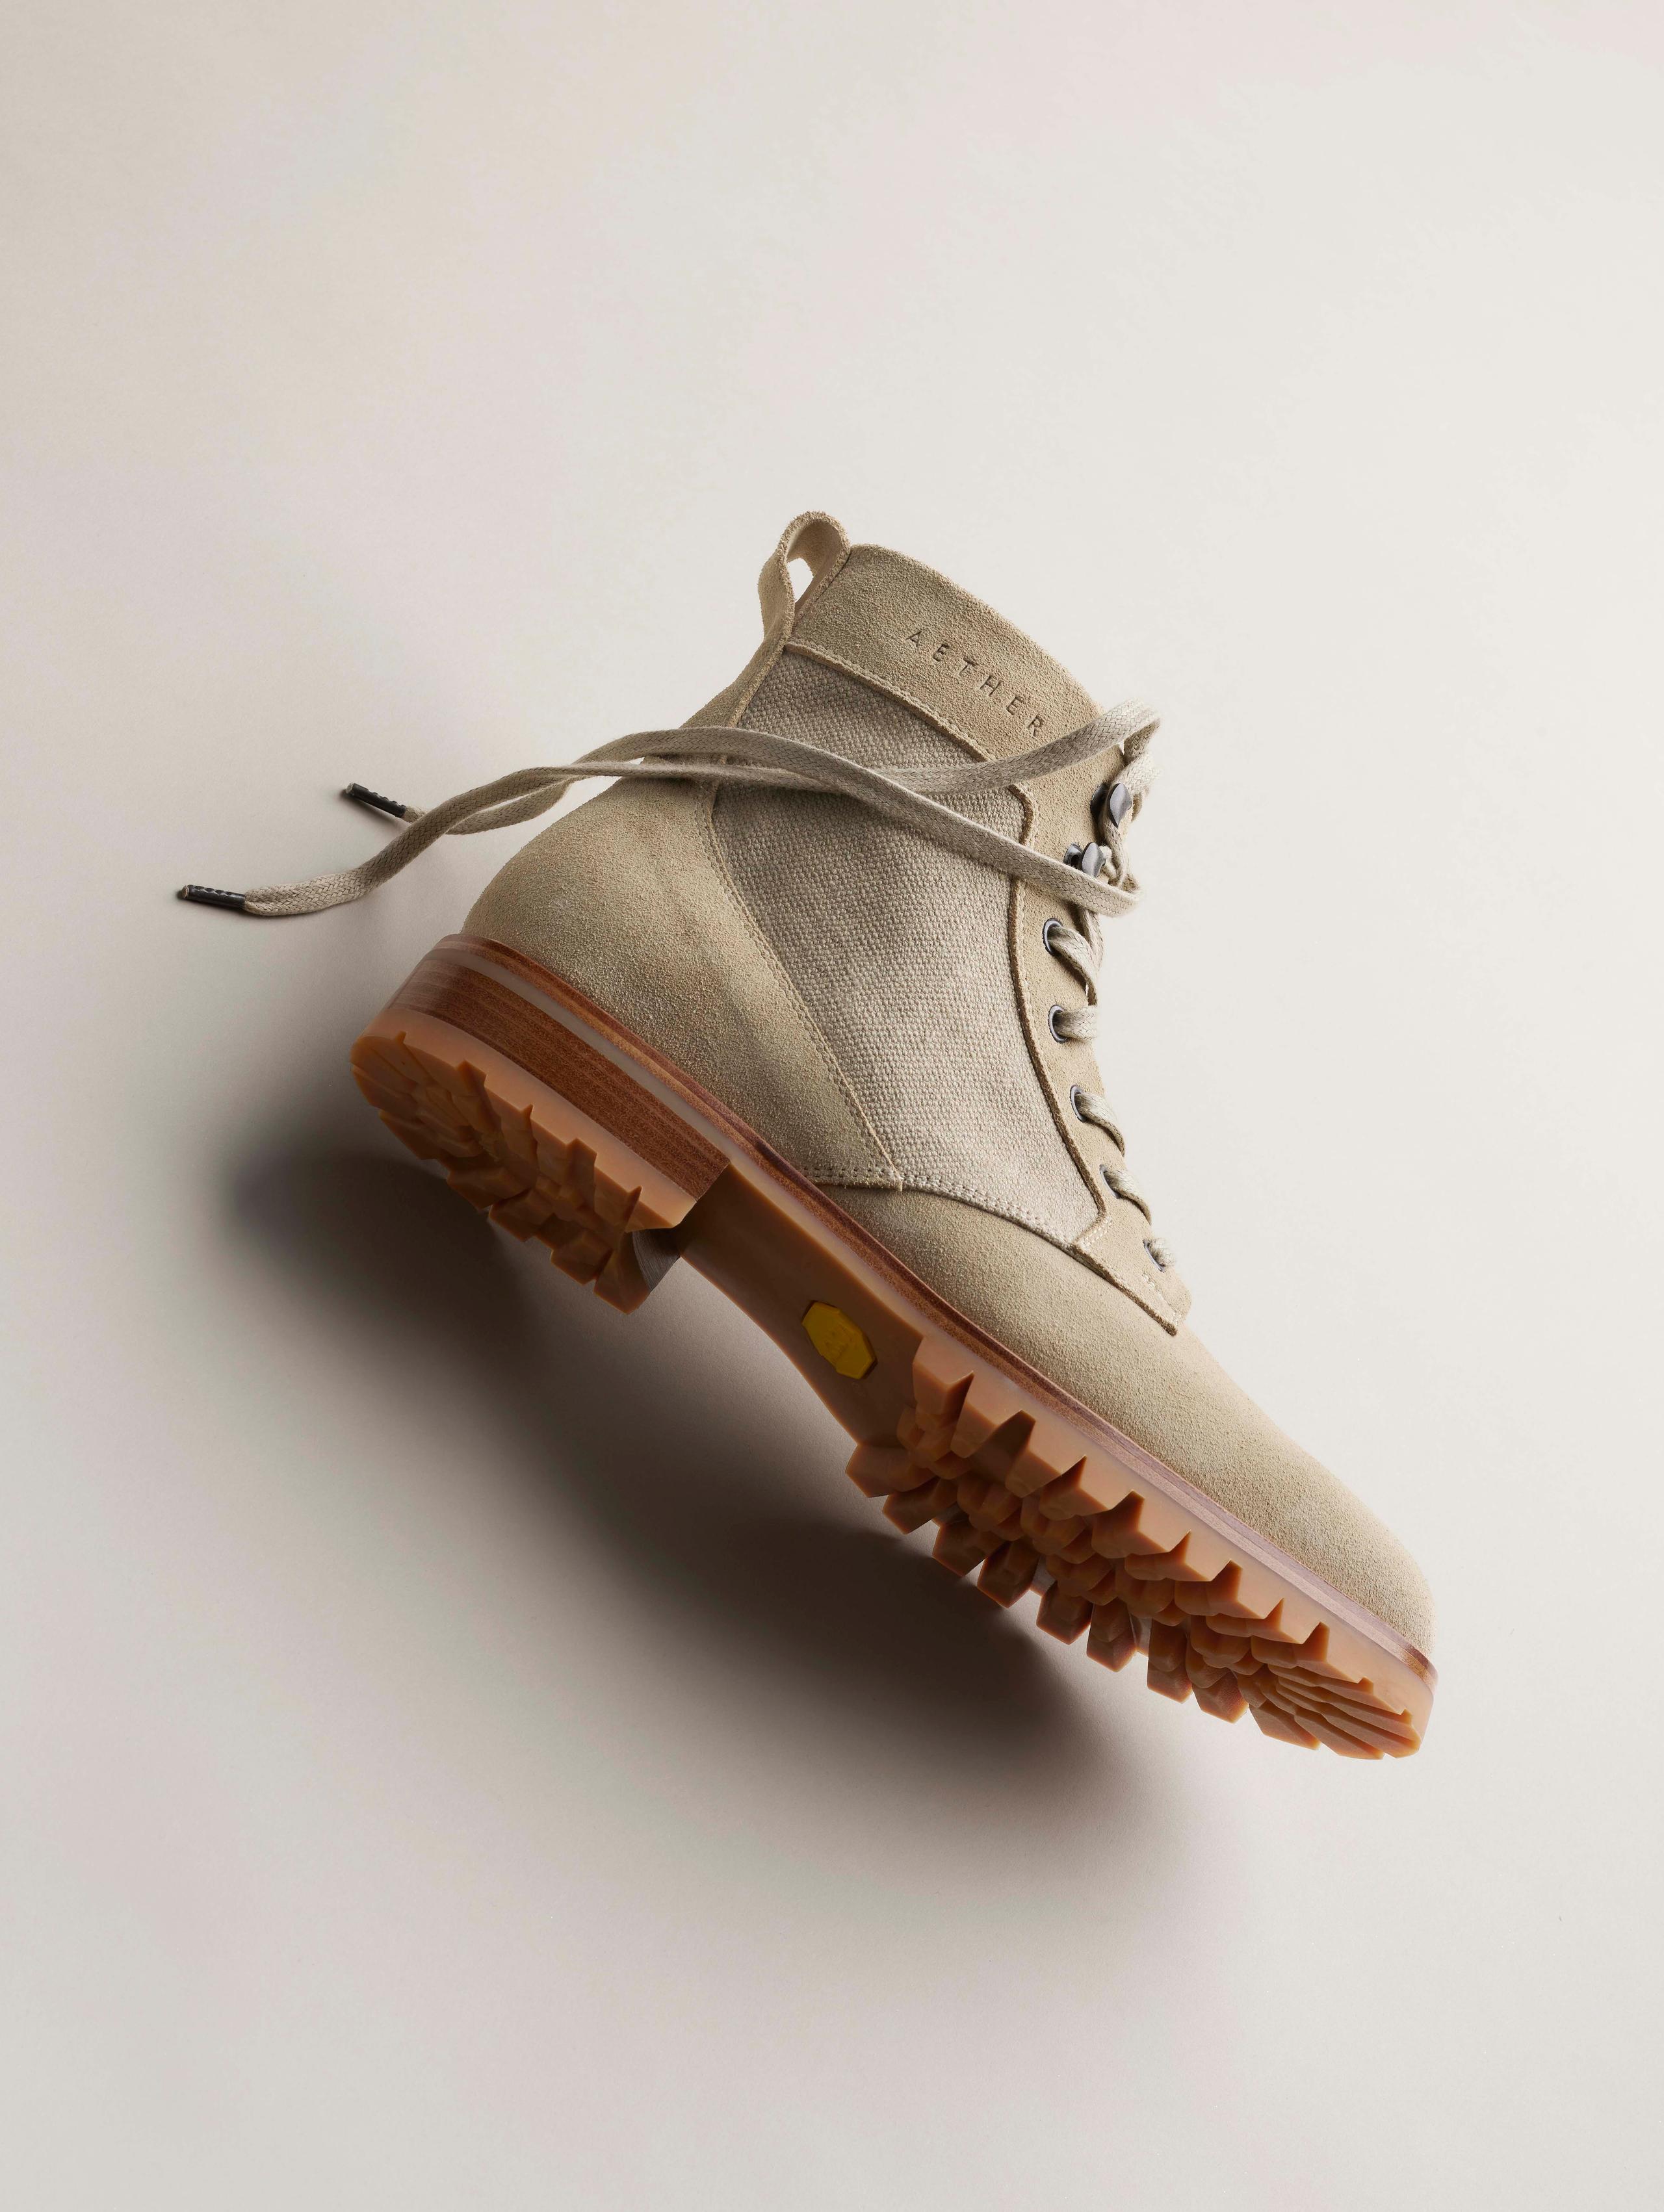 ojai boot from Aether Apparel